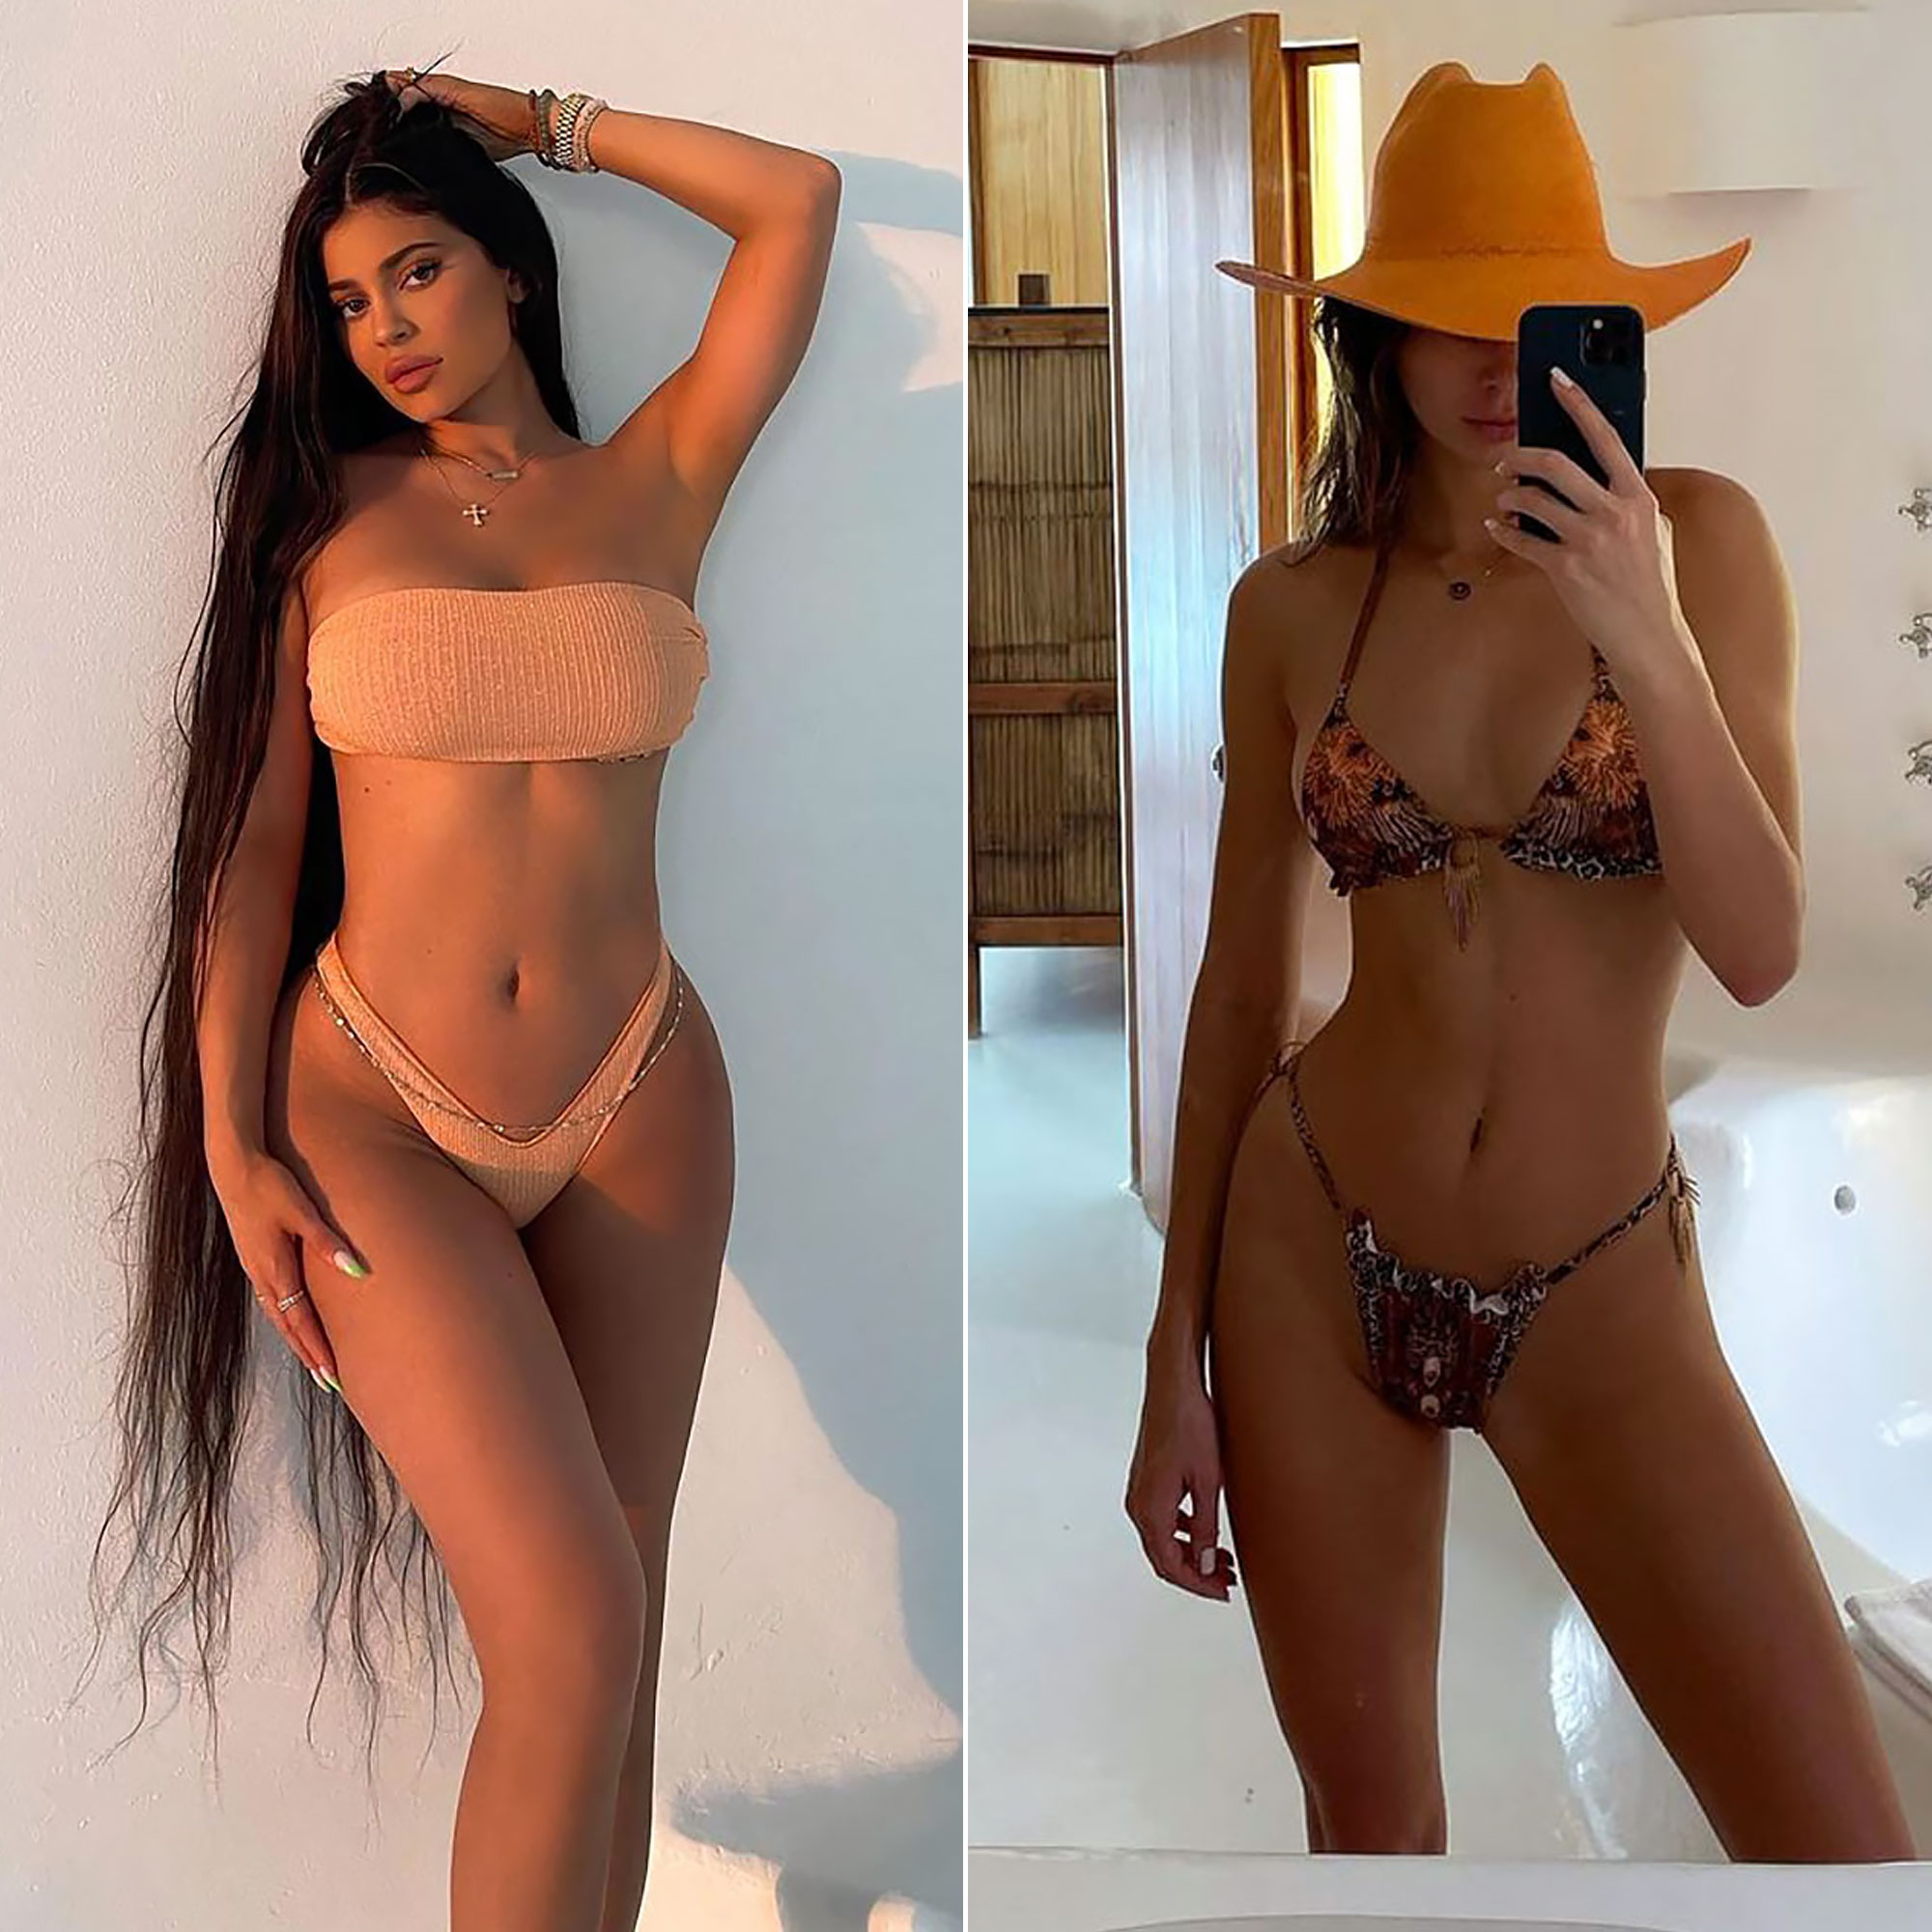 Kylie Jenner, Kendall Jenner Show Off Bikini Bodies in Mexico